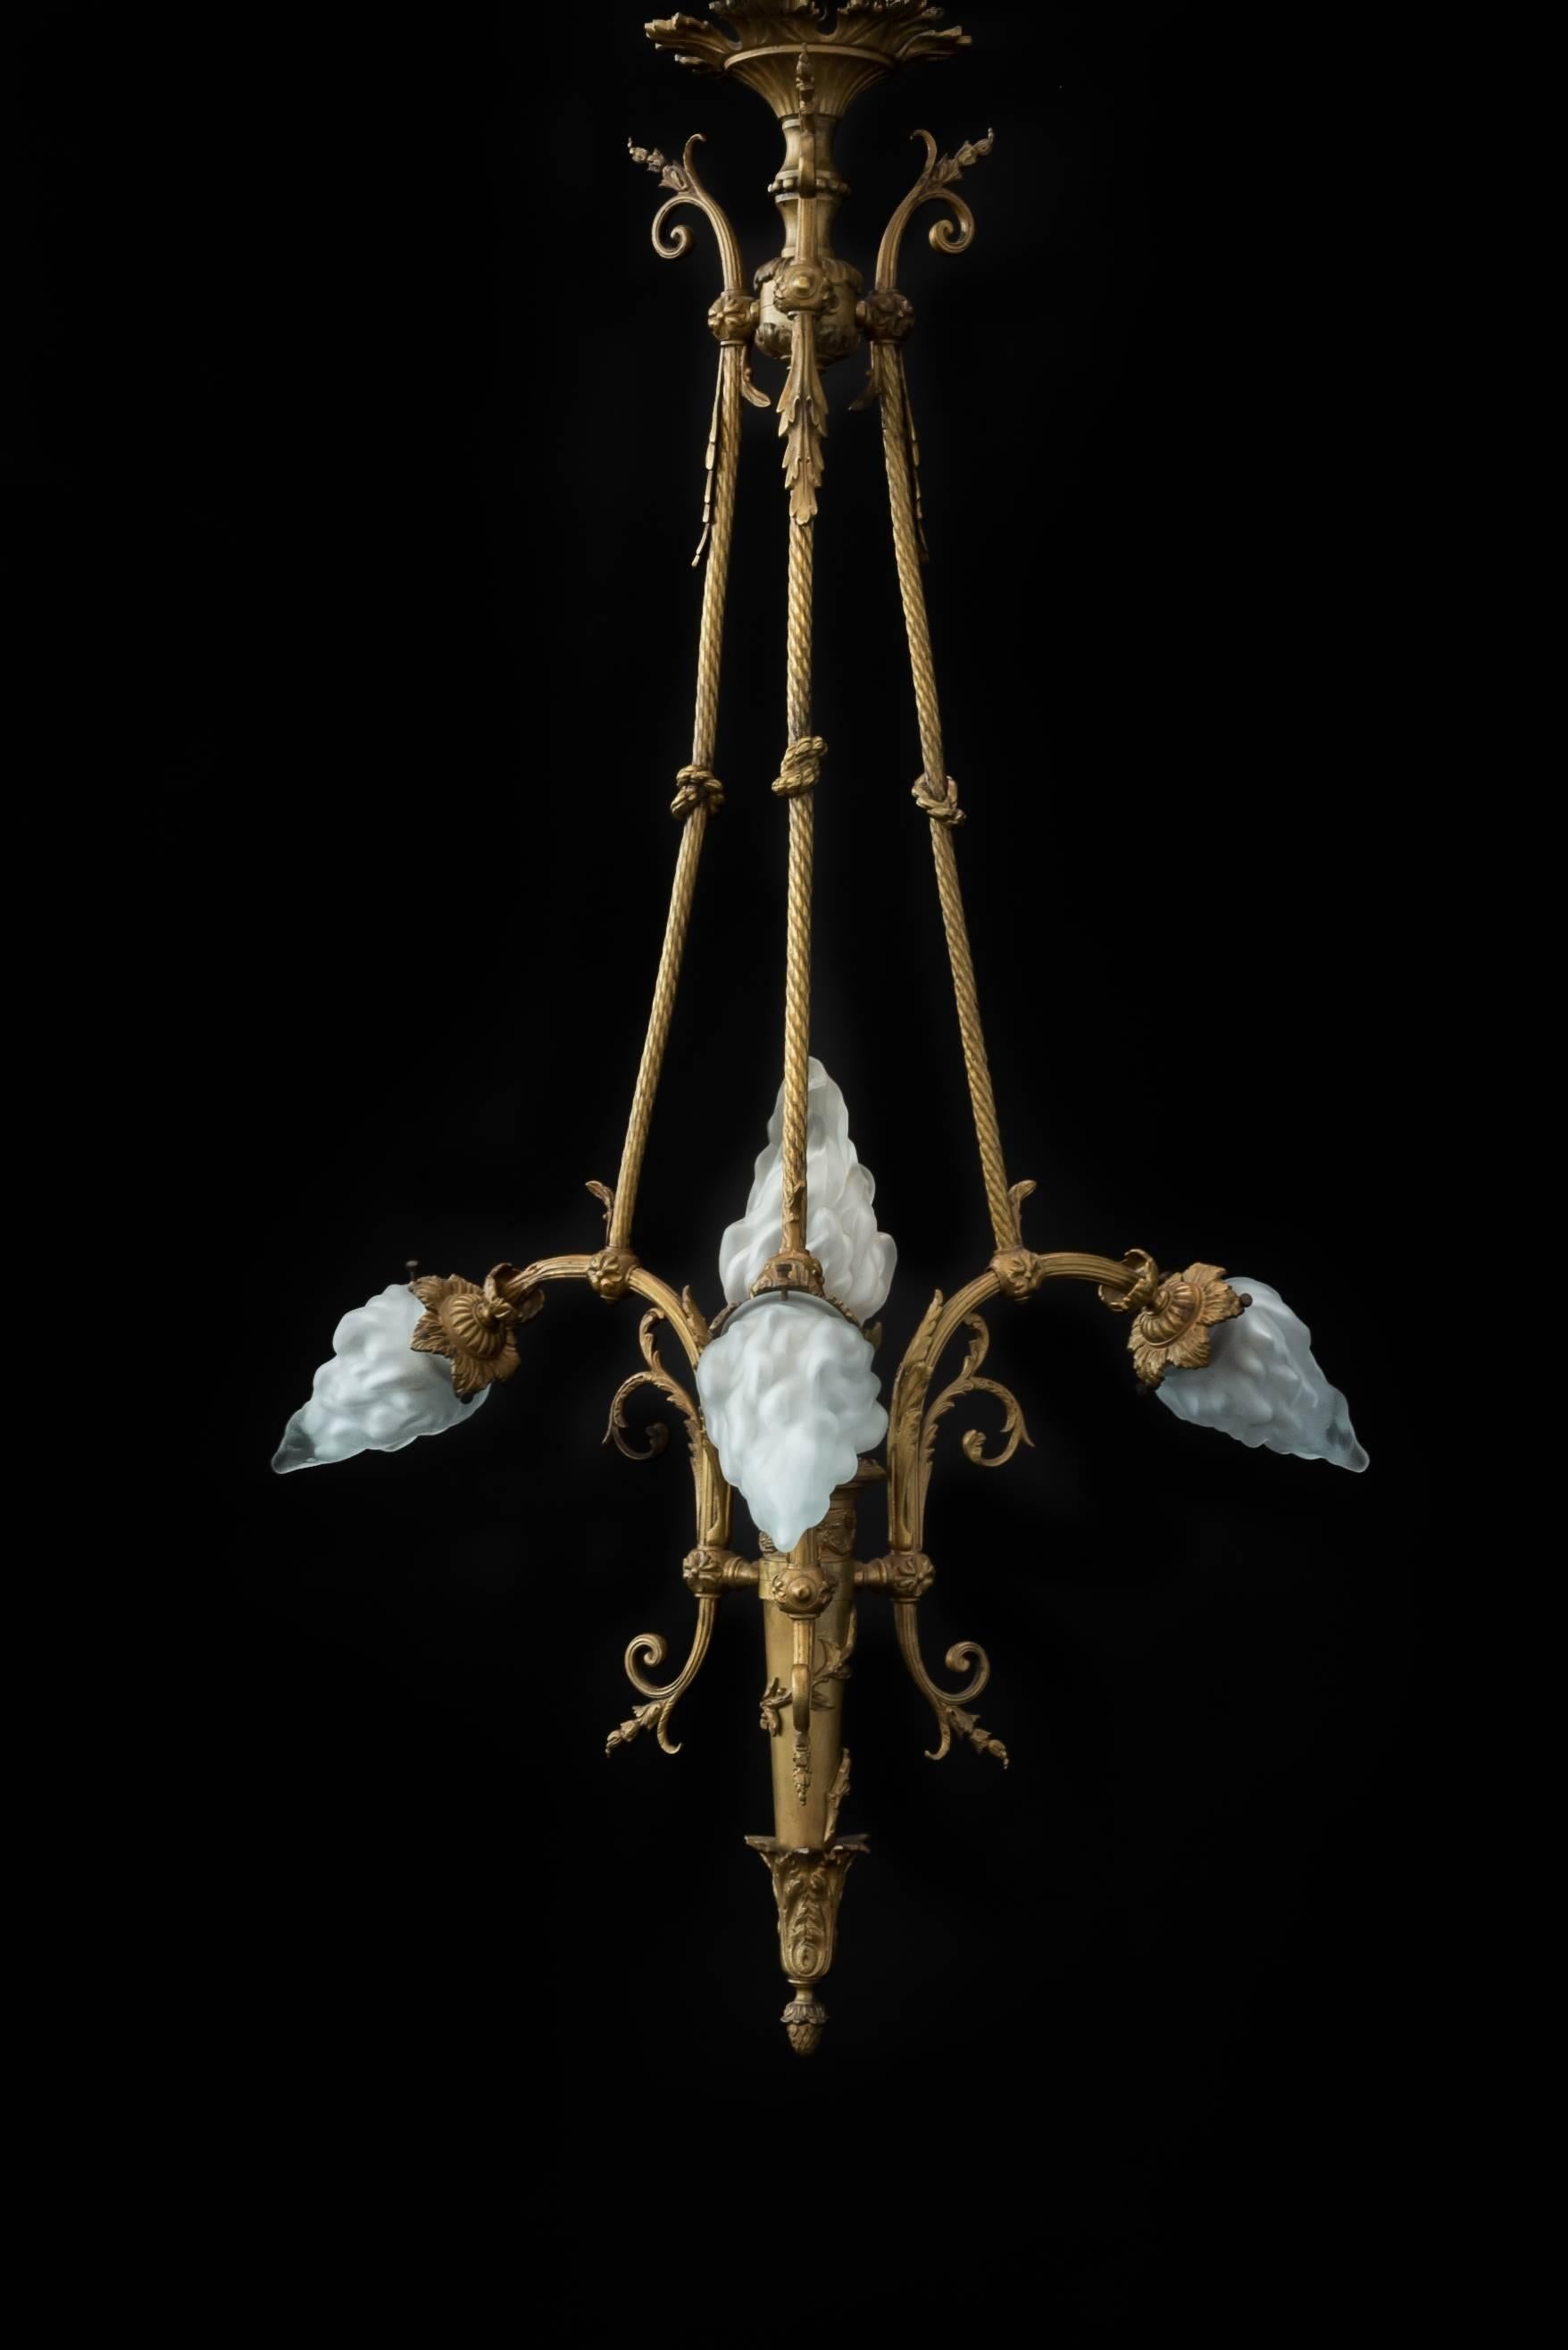 Slim hall lamp from bronze in Empire style.
Made in Paris, circa 1900.
Wonderful 2nd Empire style ornaments with hand-shaped glass balls in flame motif.
Elegant slender pendant.